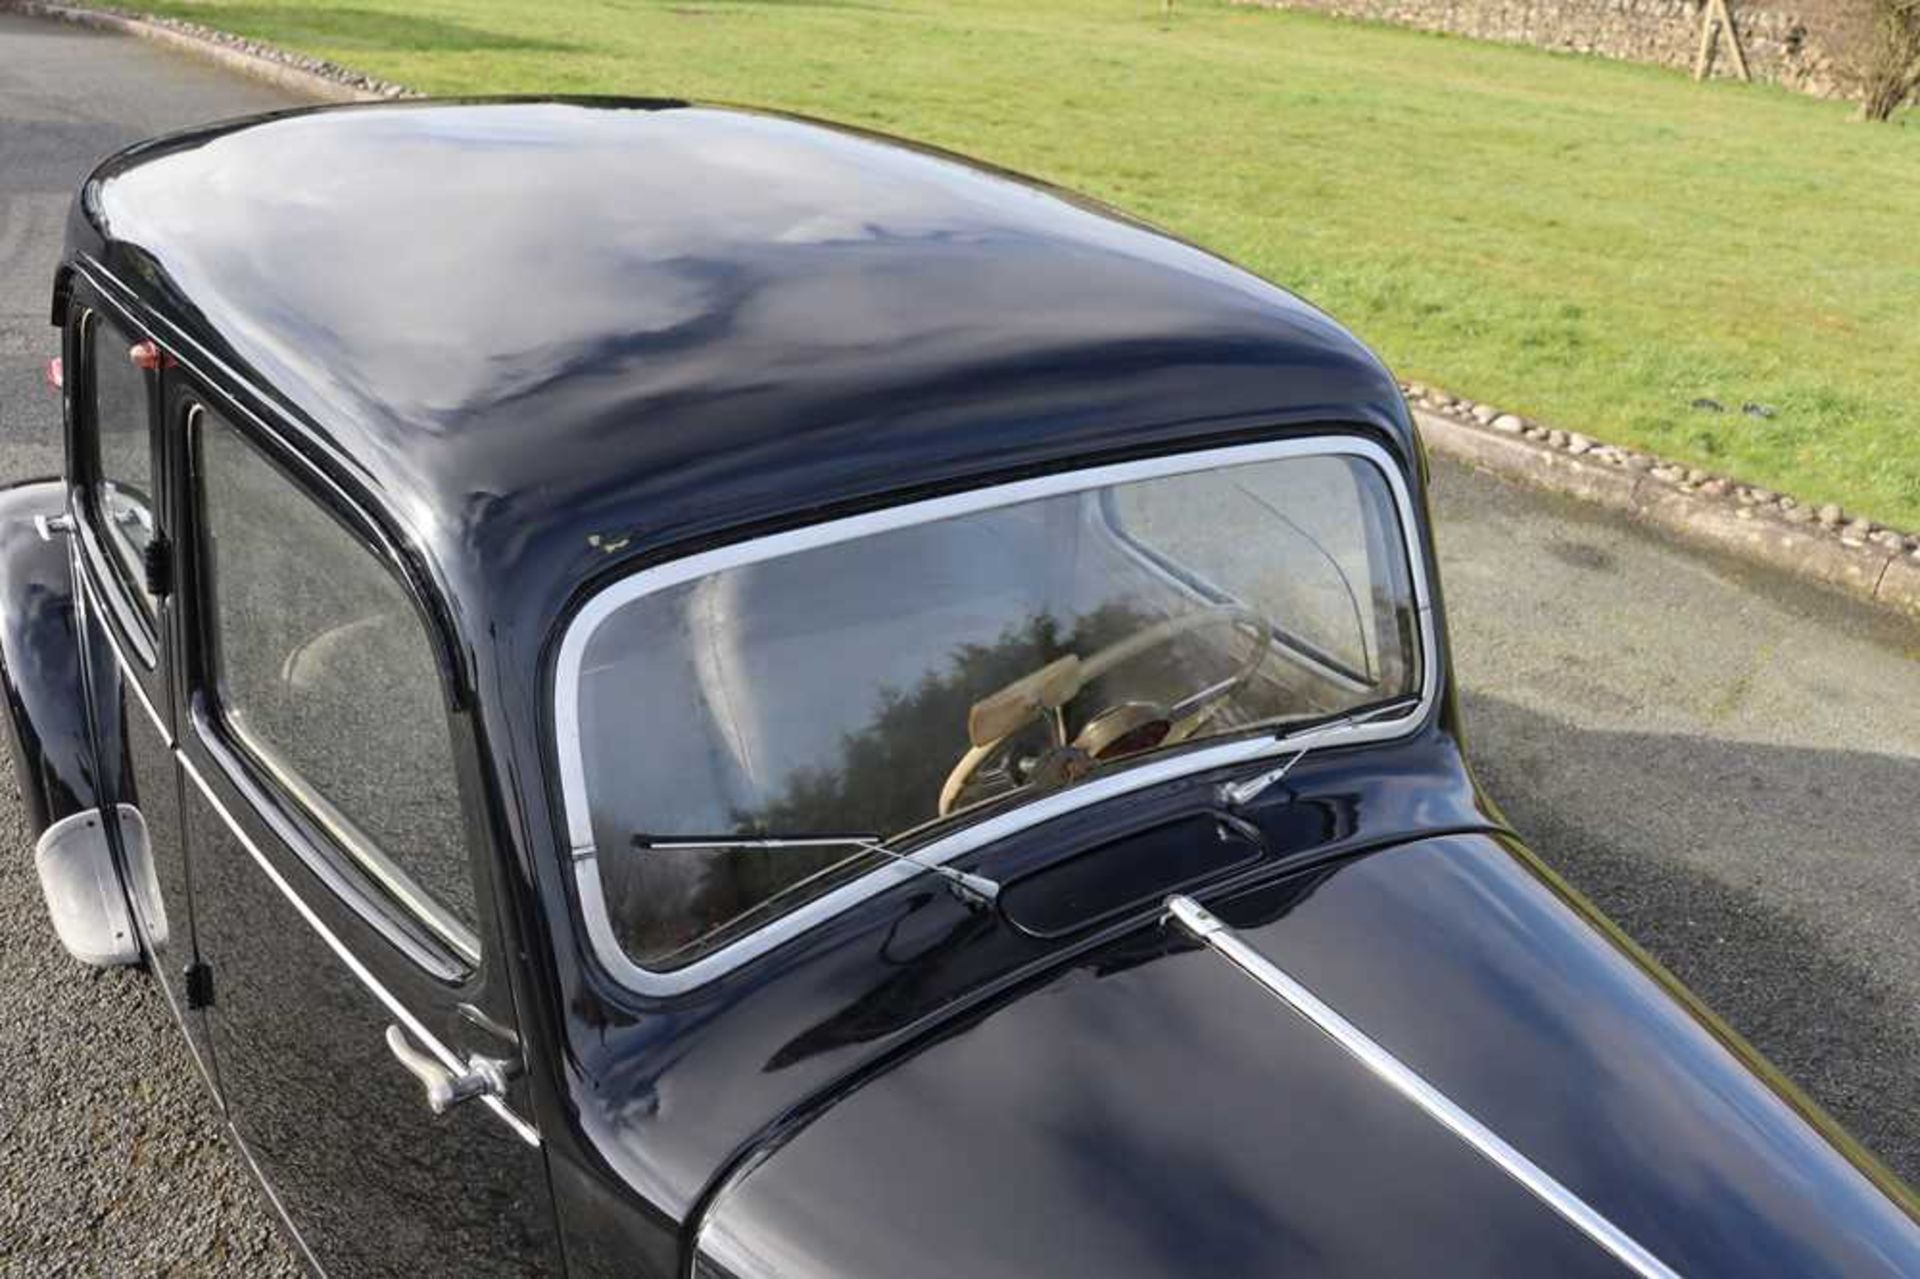 1952 Citroën 11BL Traction Avant In current ownership for over 40 years - Image 23 of 60